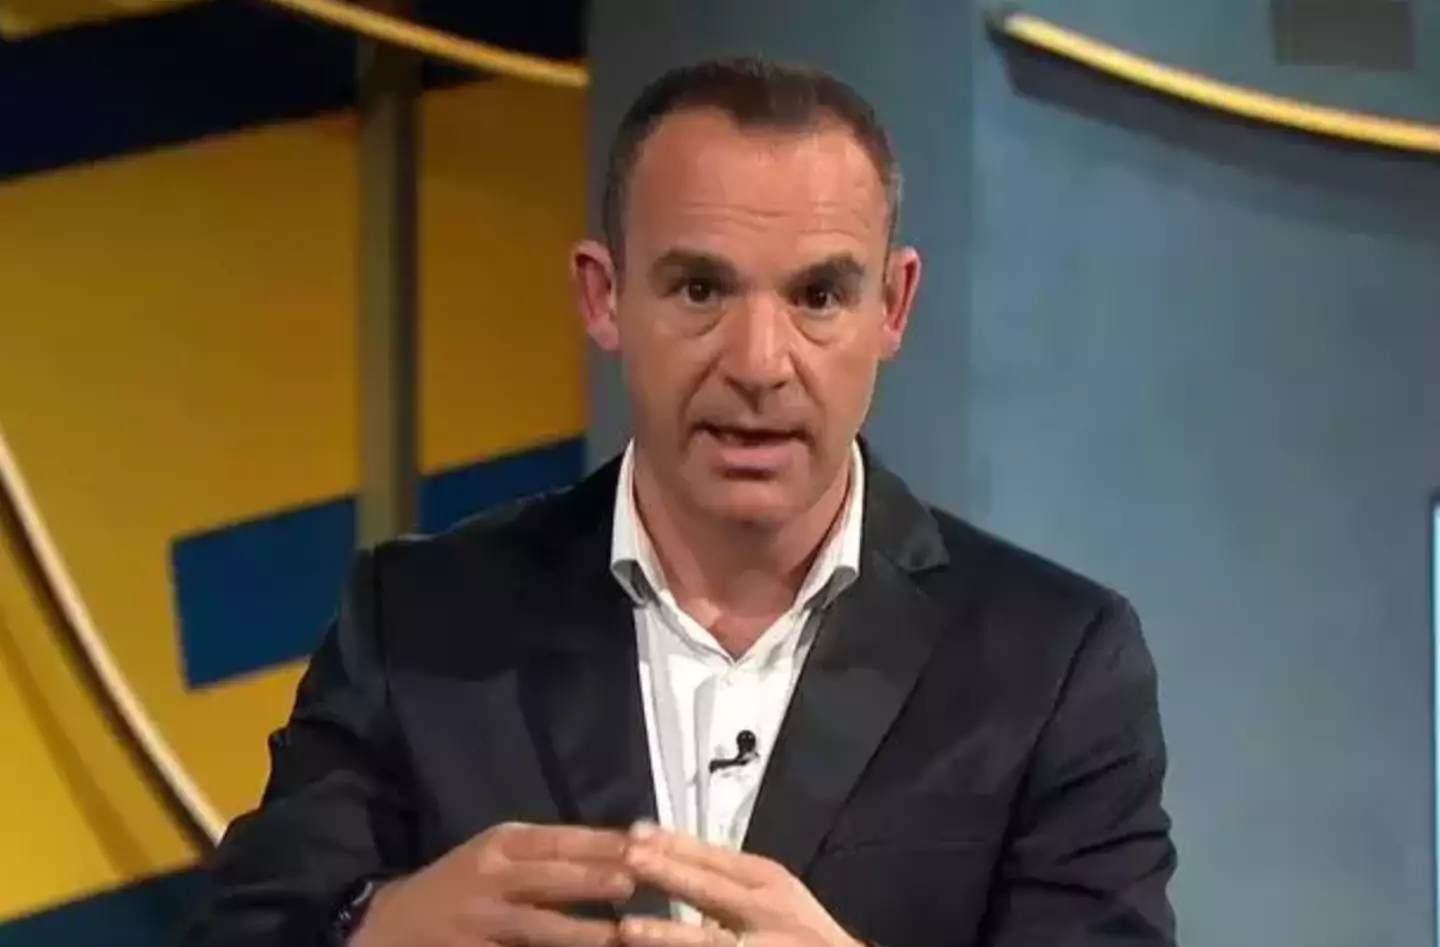 Martin Lewis has urged Brits to get travel Insurance.